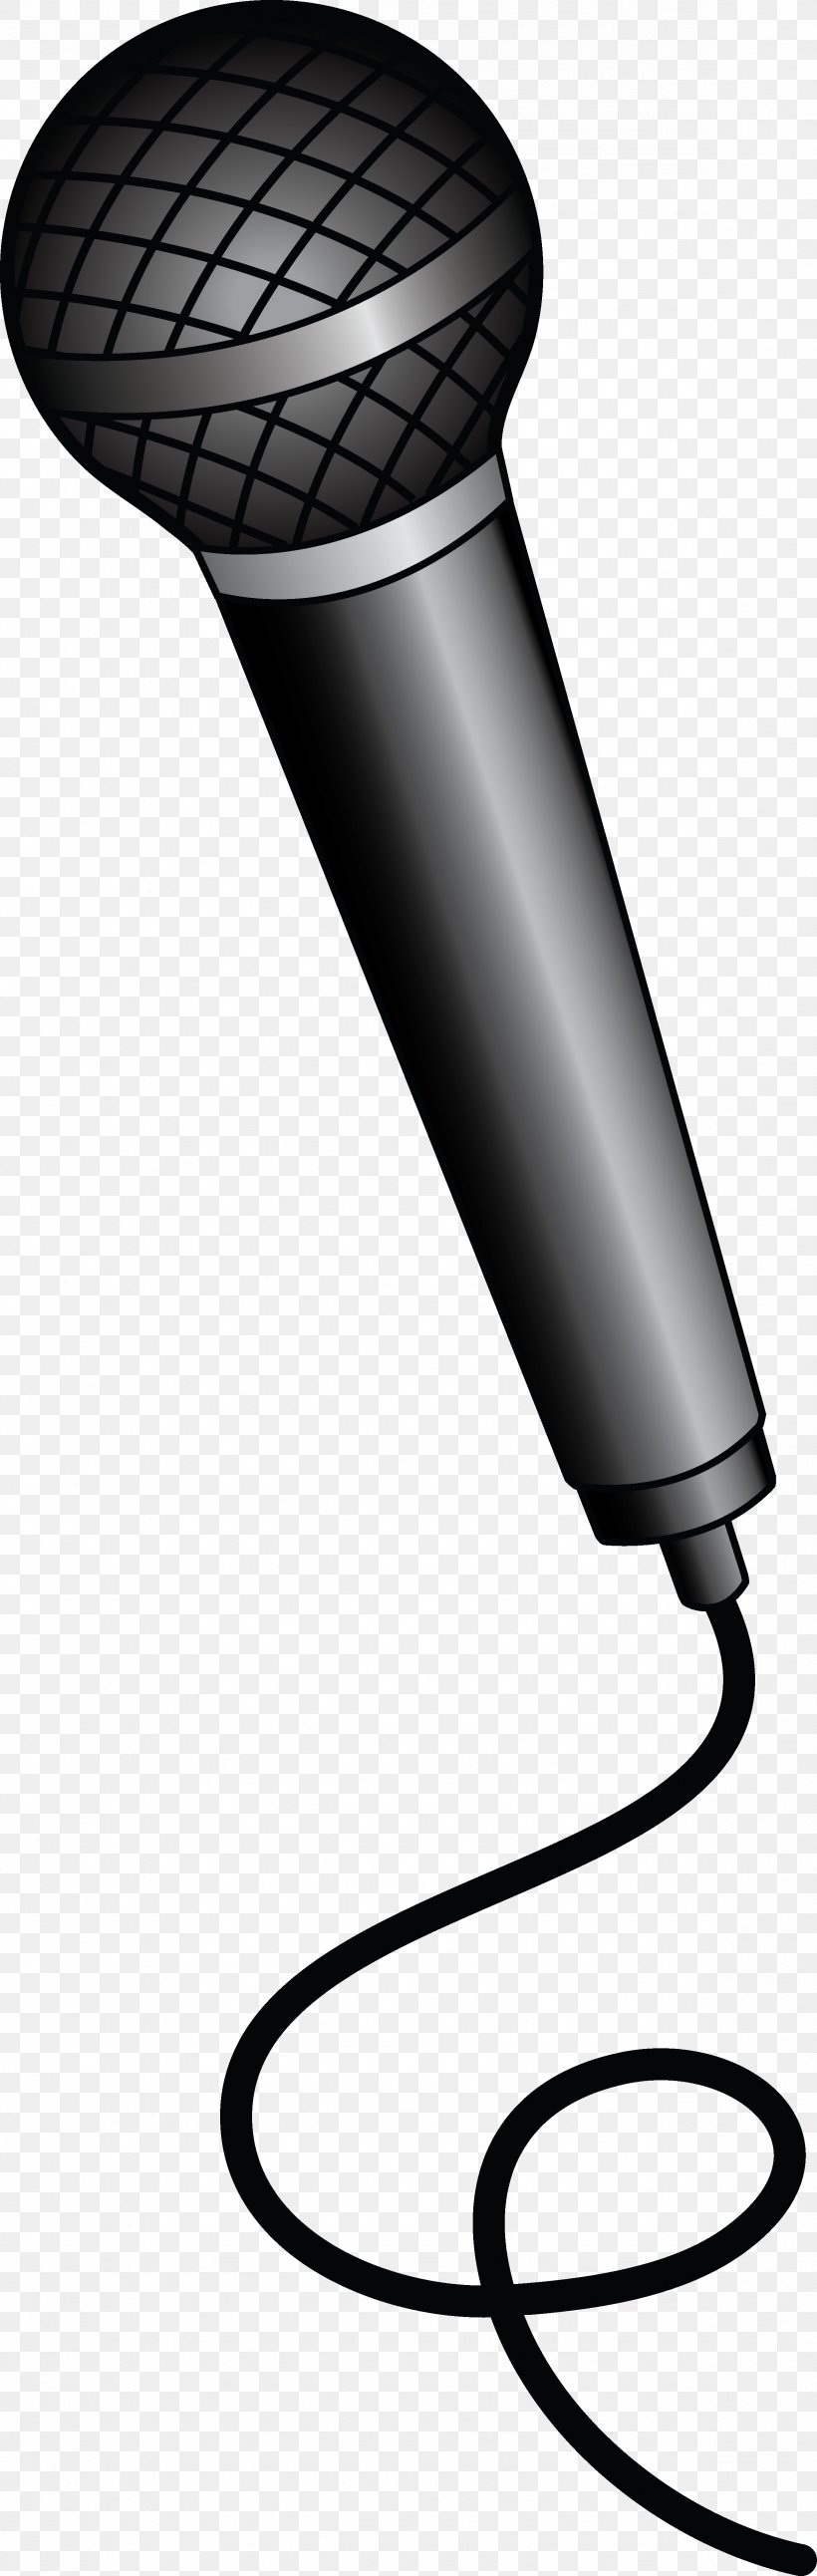 Microphone Clip Art, PNG, 2353x7419px, Microphone, Audio, Audio Equipment, Black And White, Cartoon Download Free